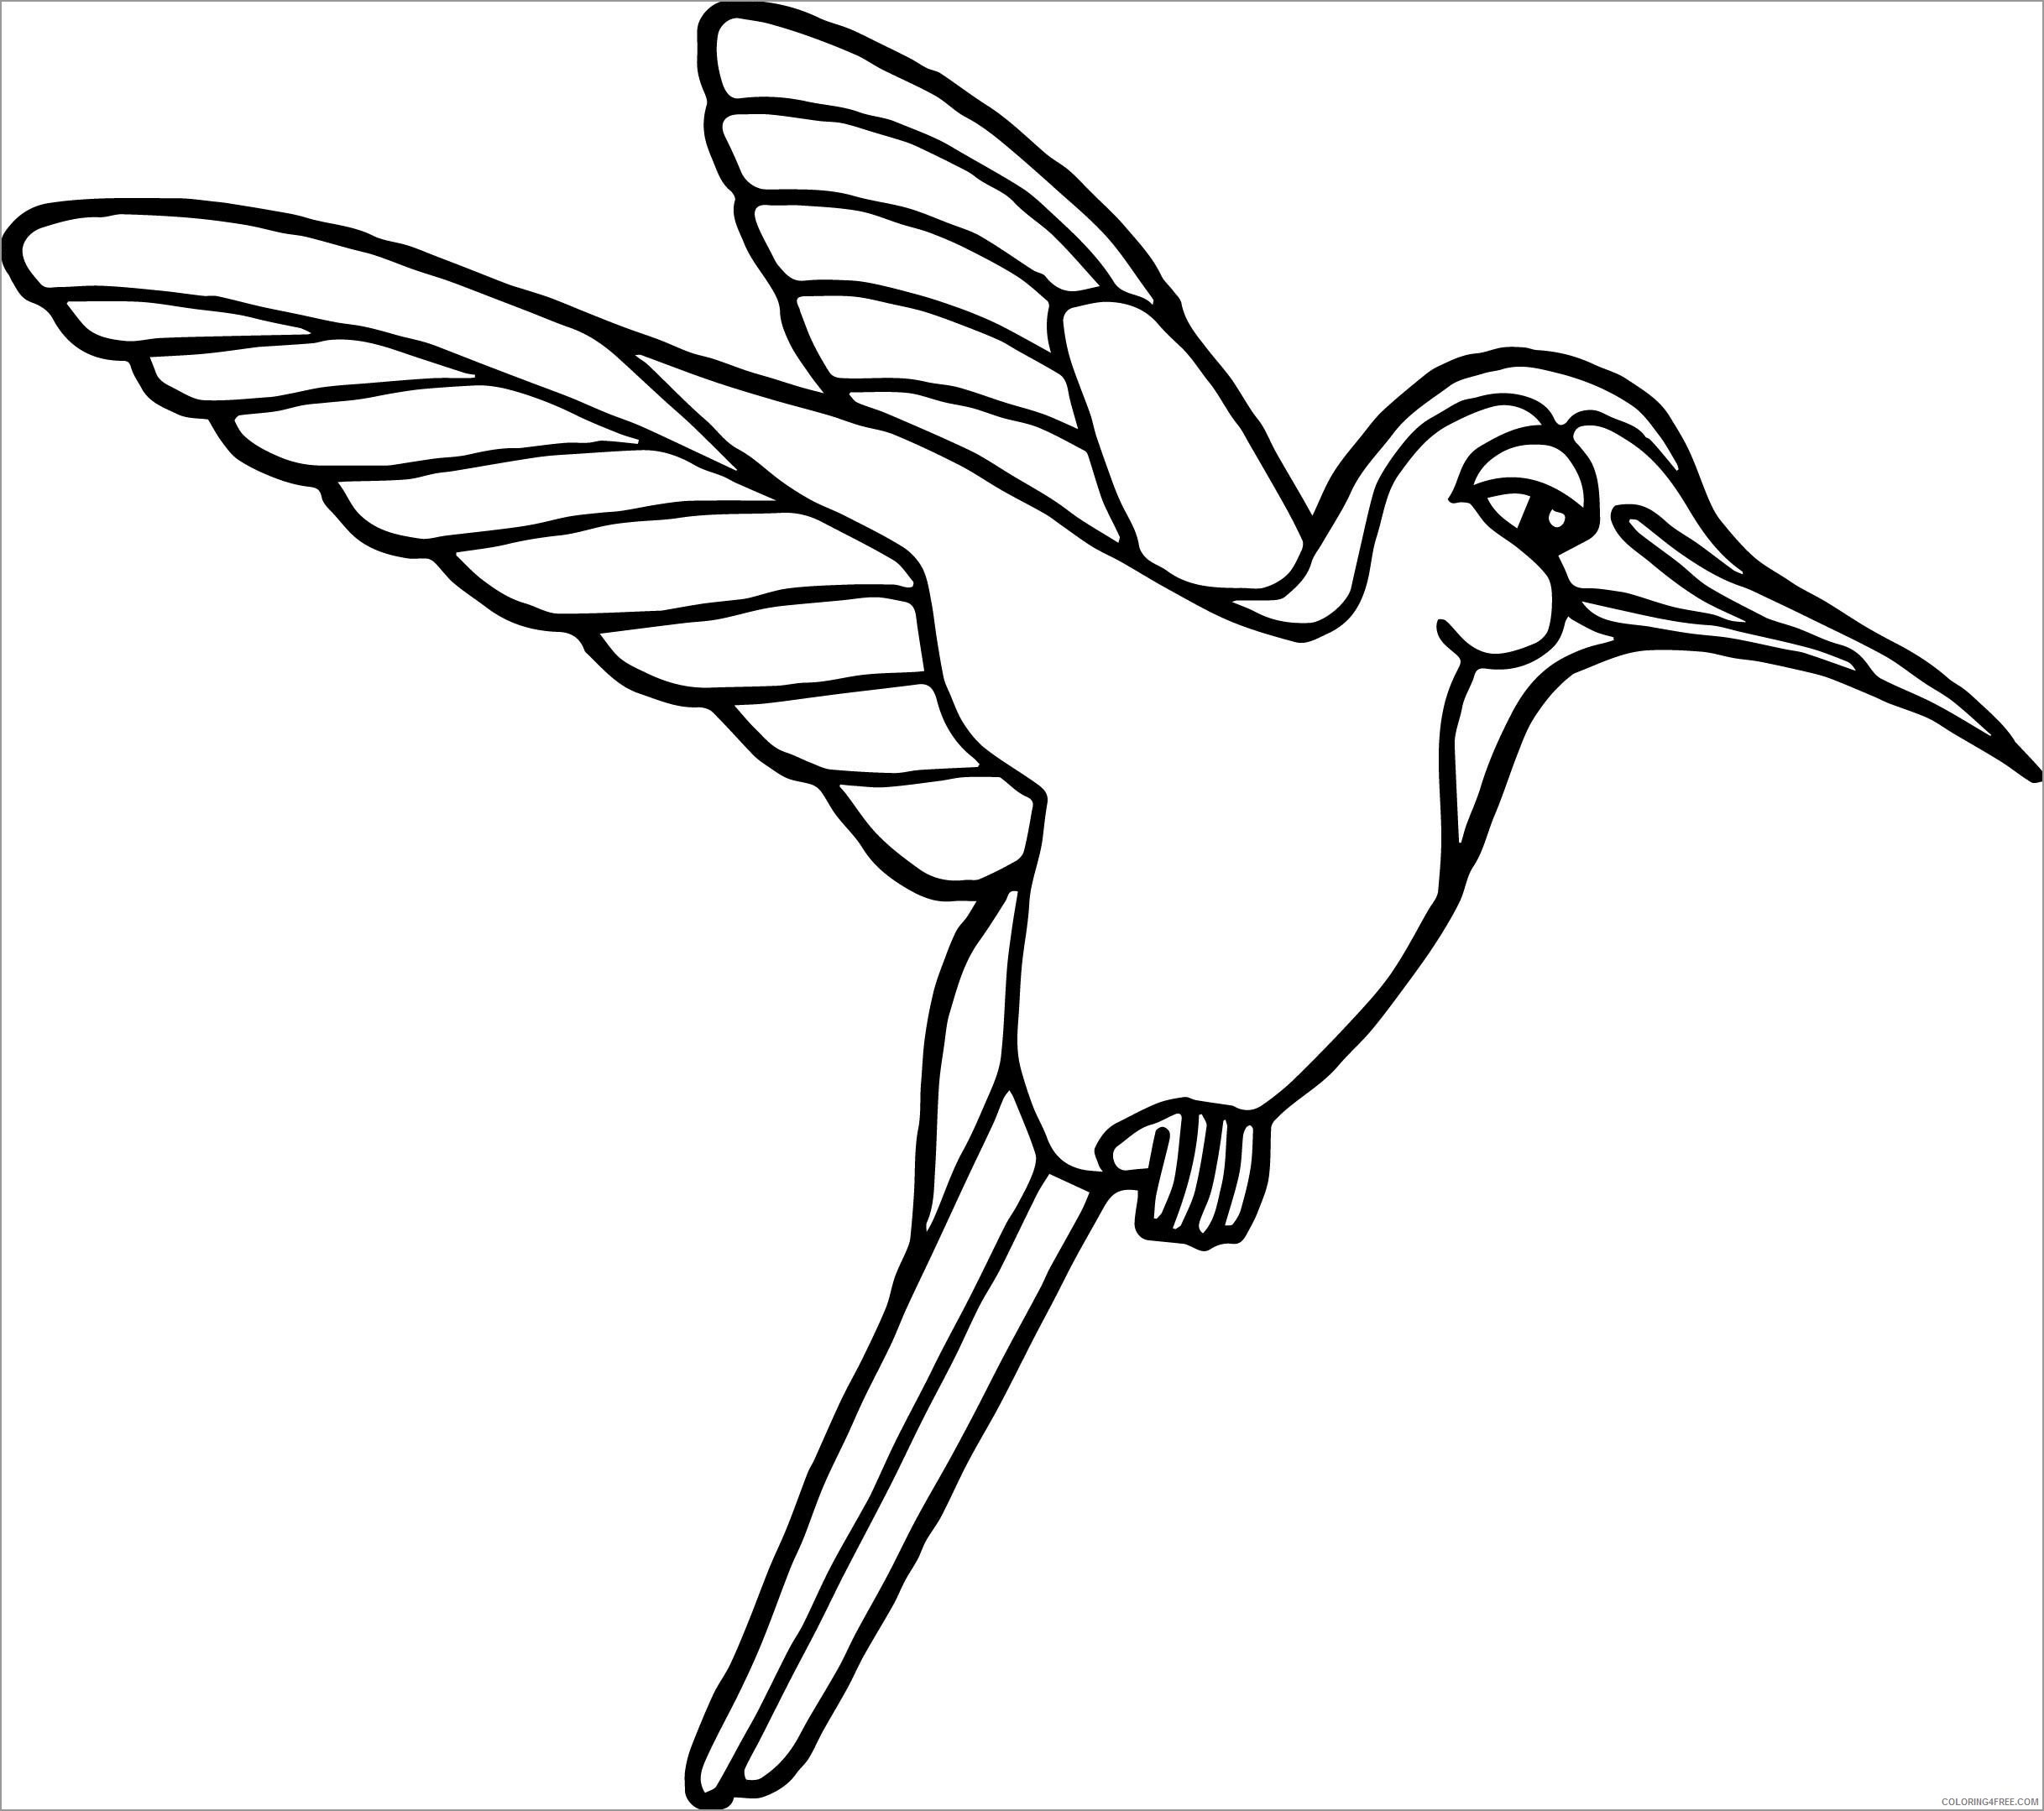 Rainforest Coloring Pages Nature rainforest bird Printable 2021 473 Coloring4free